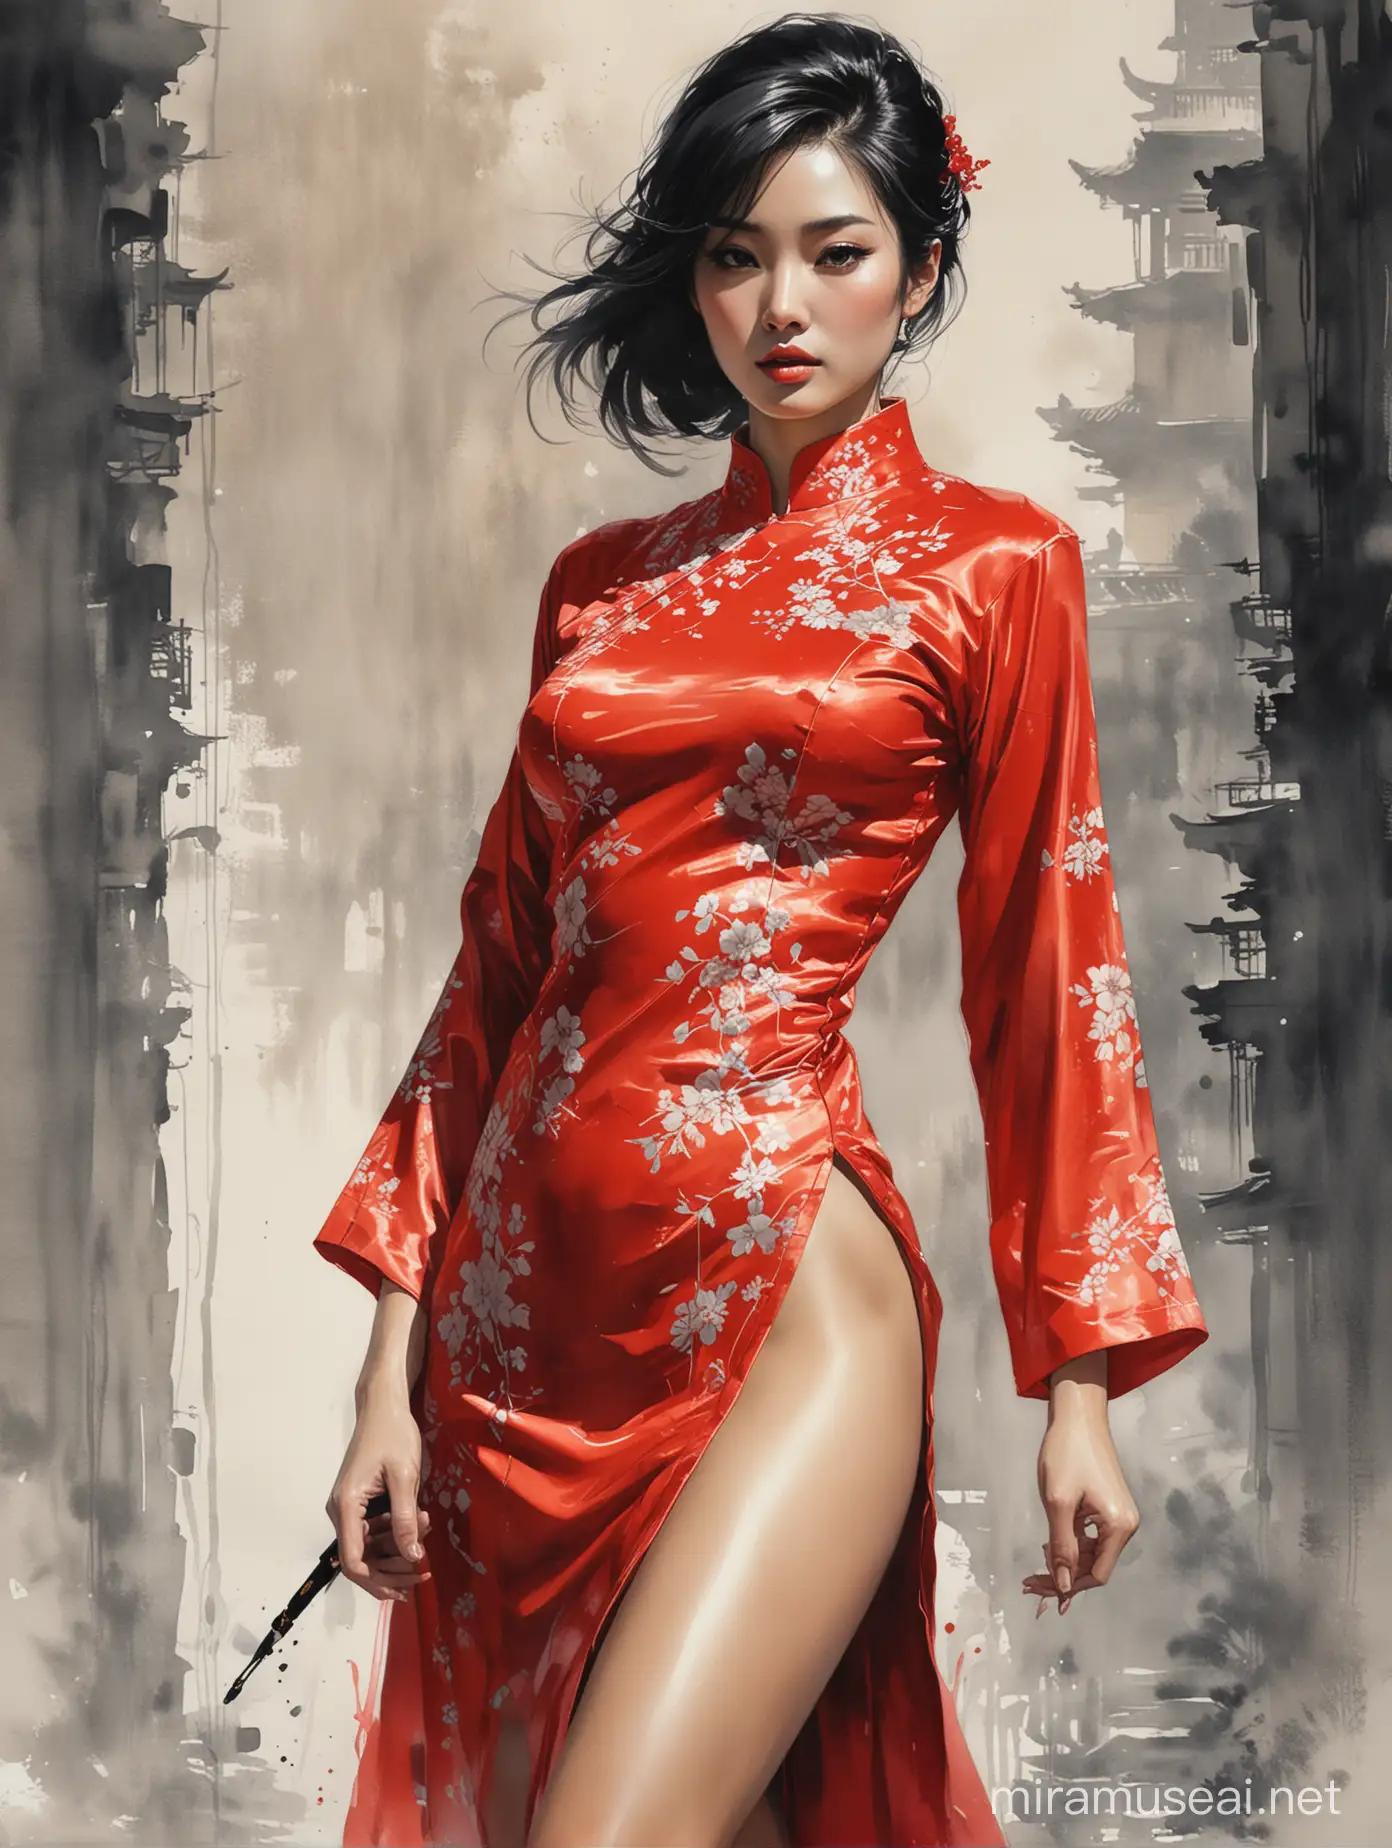 Sultry Seductive Woman in Red Qipao Illustration